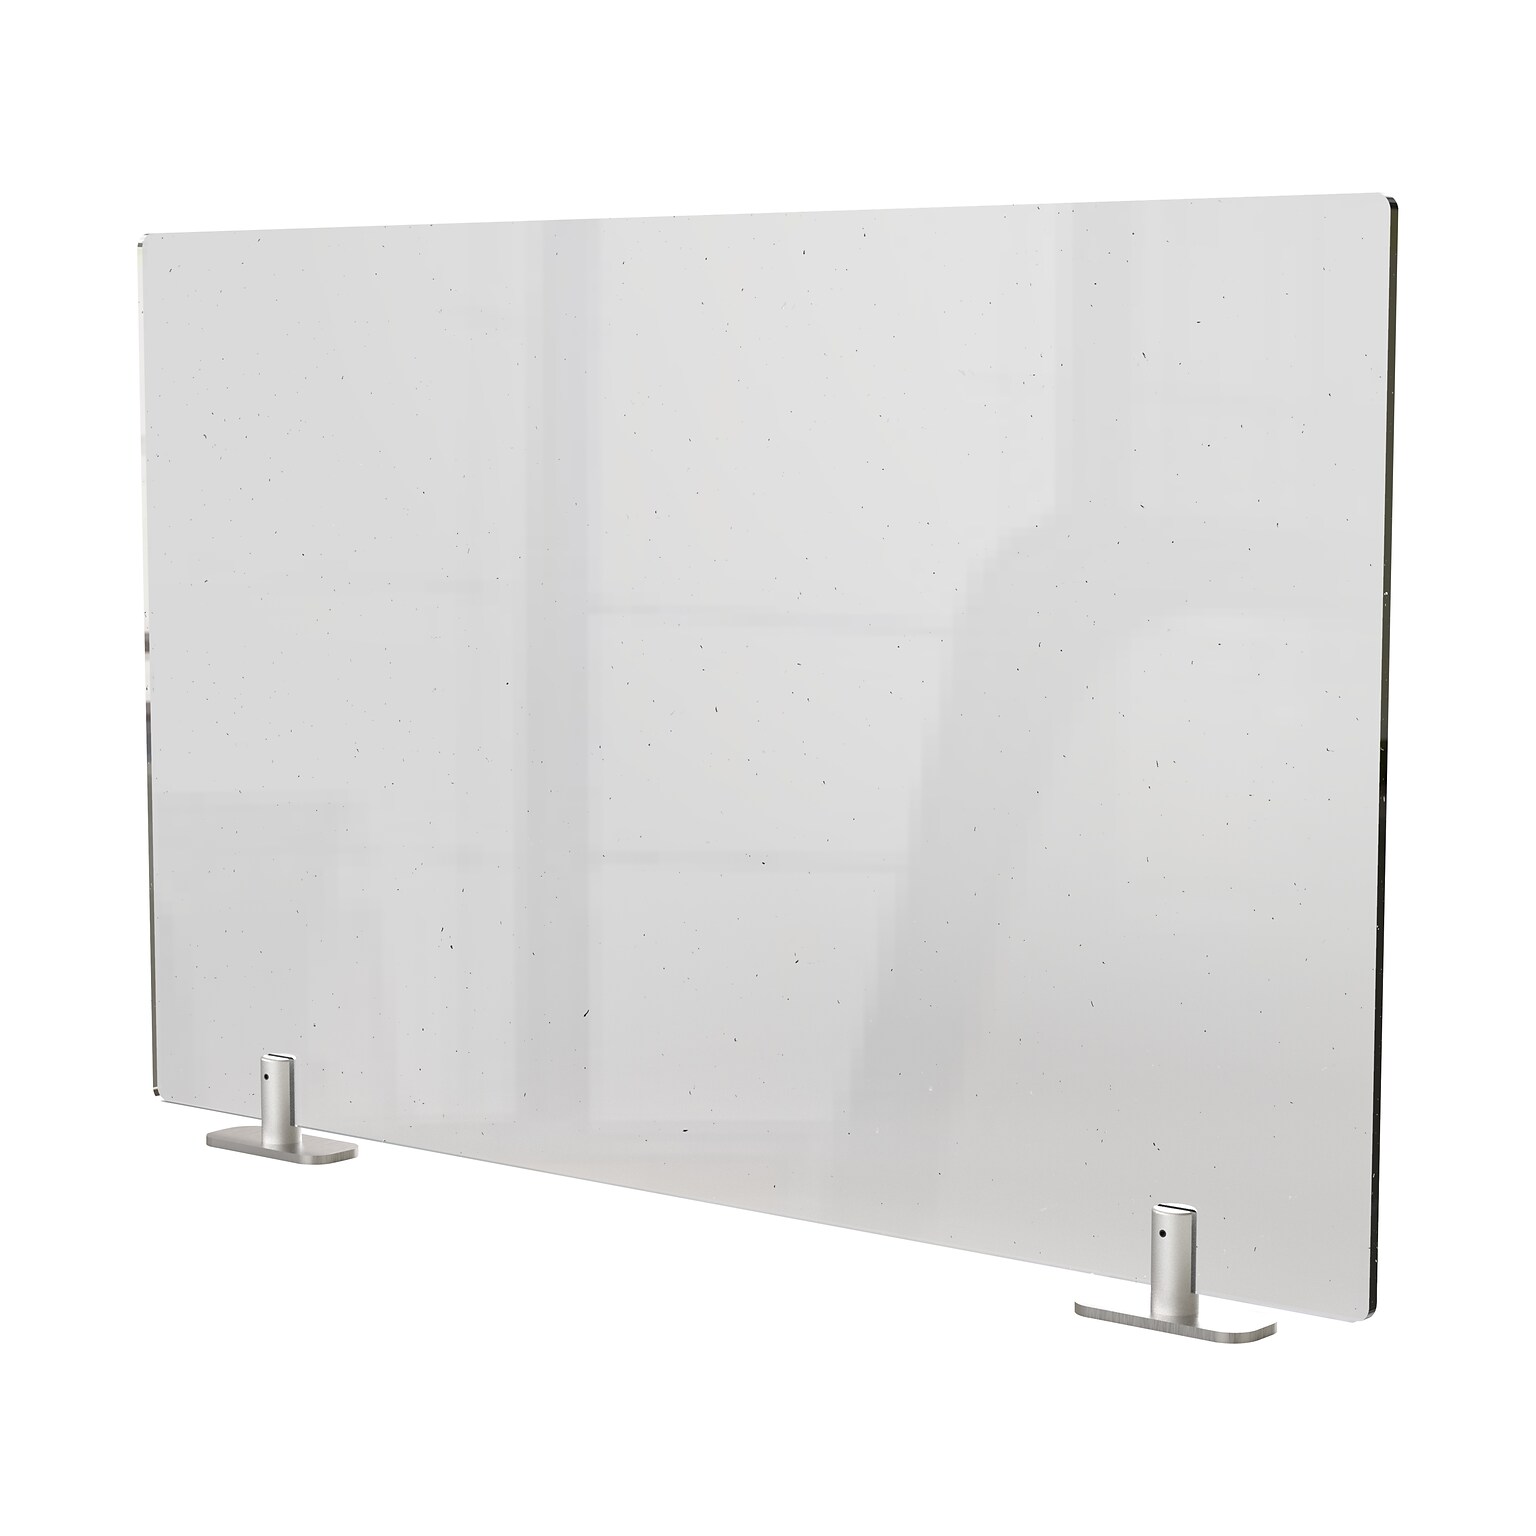 Ghent Panel, 30H x 24W, Clear Acrylic (PEC3024-T)